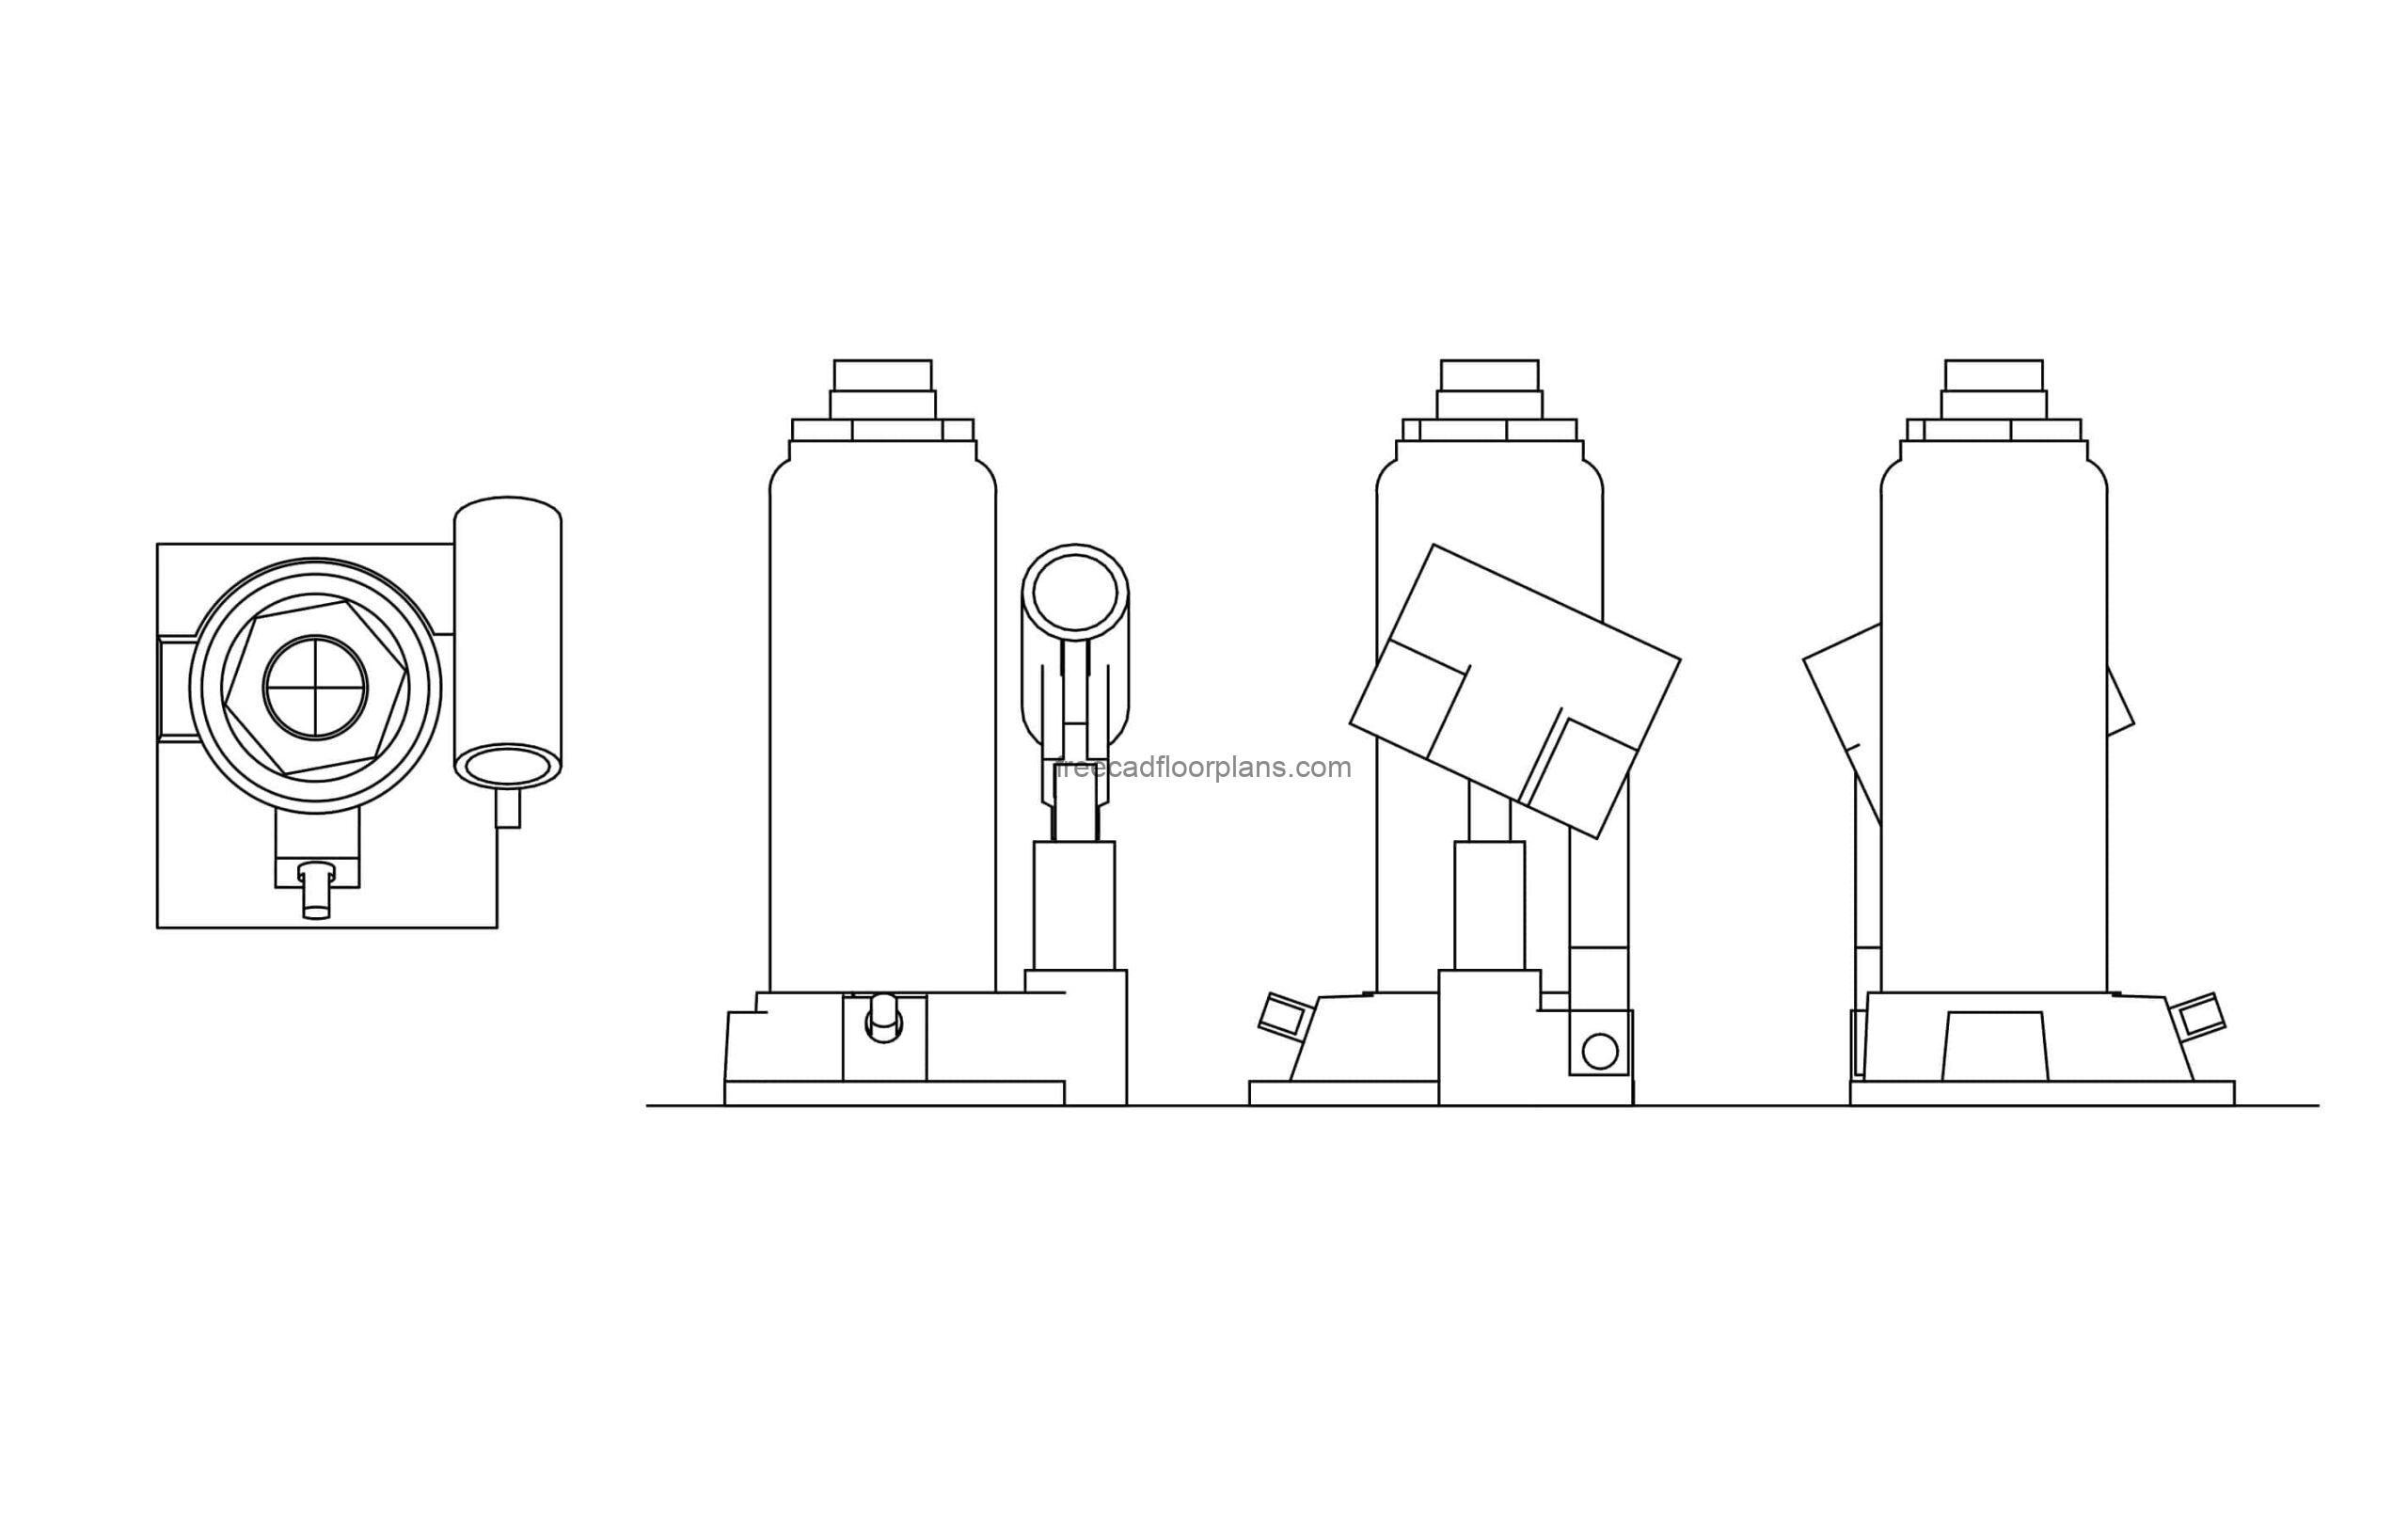 cad block drawing of a hydraulic bottle jack plan and elevations 2d views file in dwg format for free download